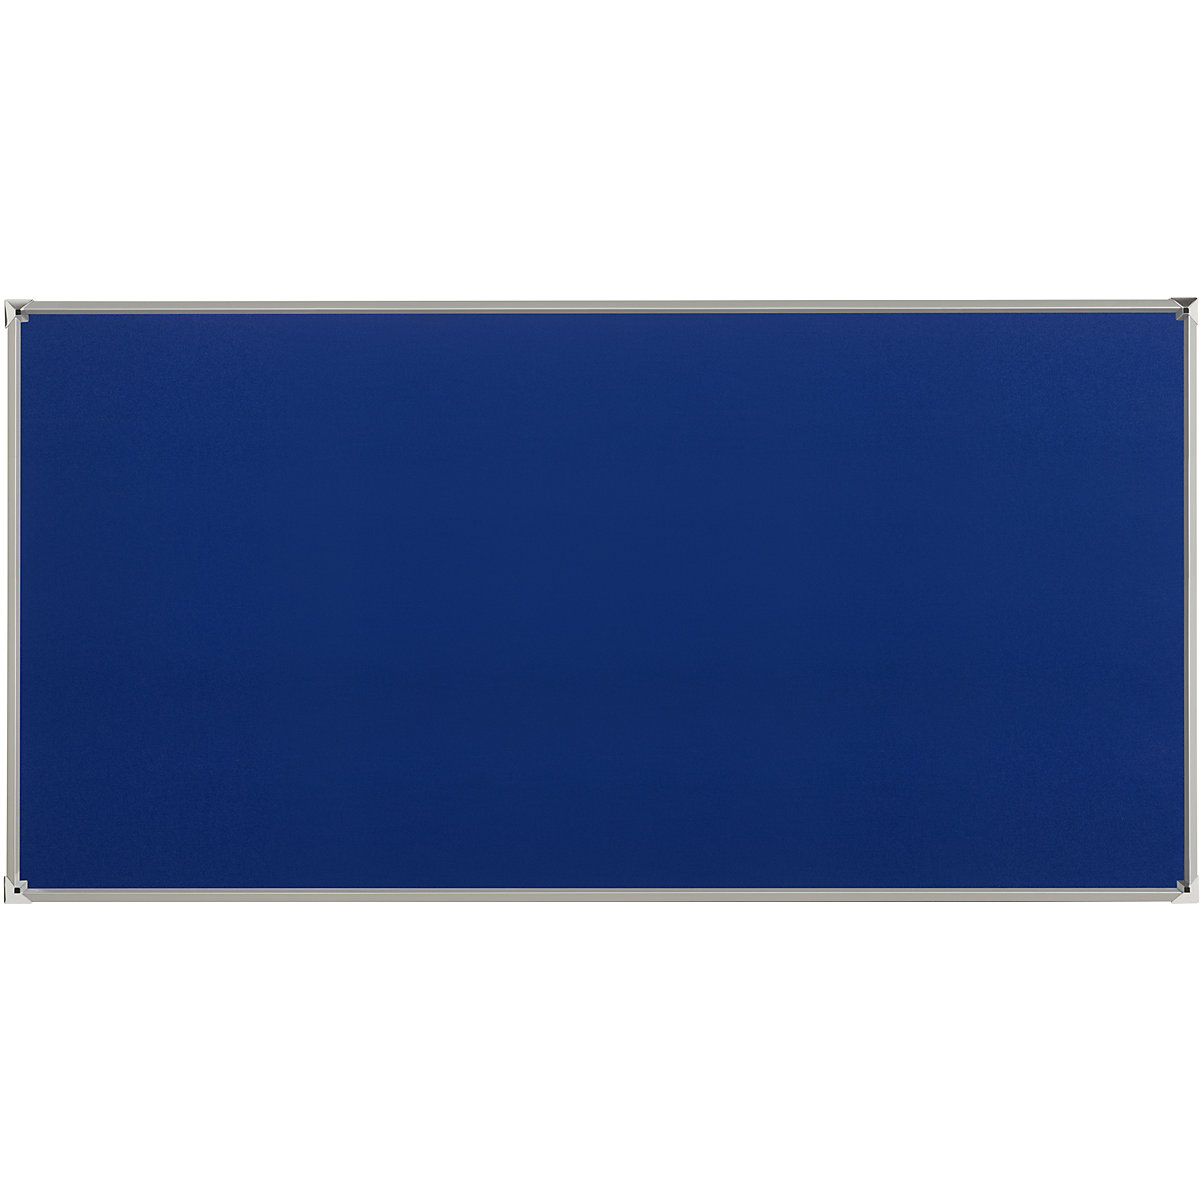 Pinboard with aluminium frame – eurokraft pro, fabric covering, blue, WxH 2000 x 1000 mm-5